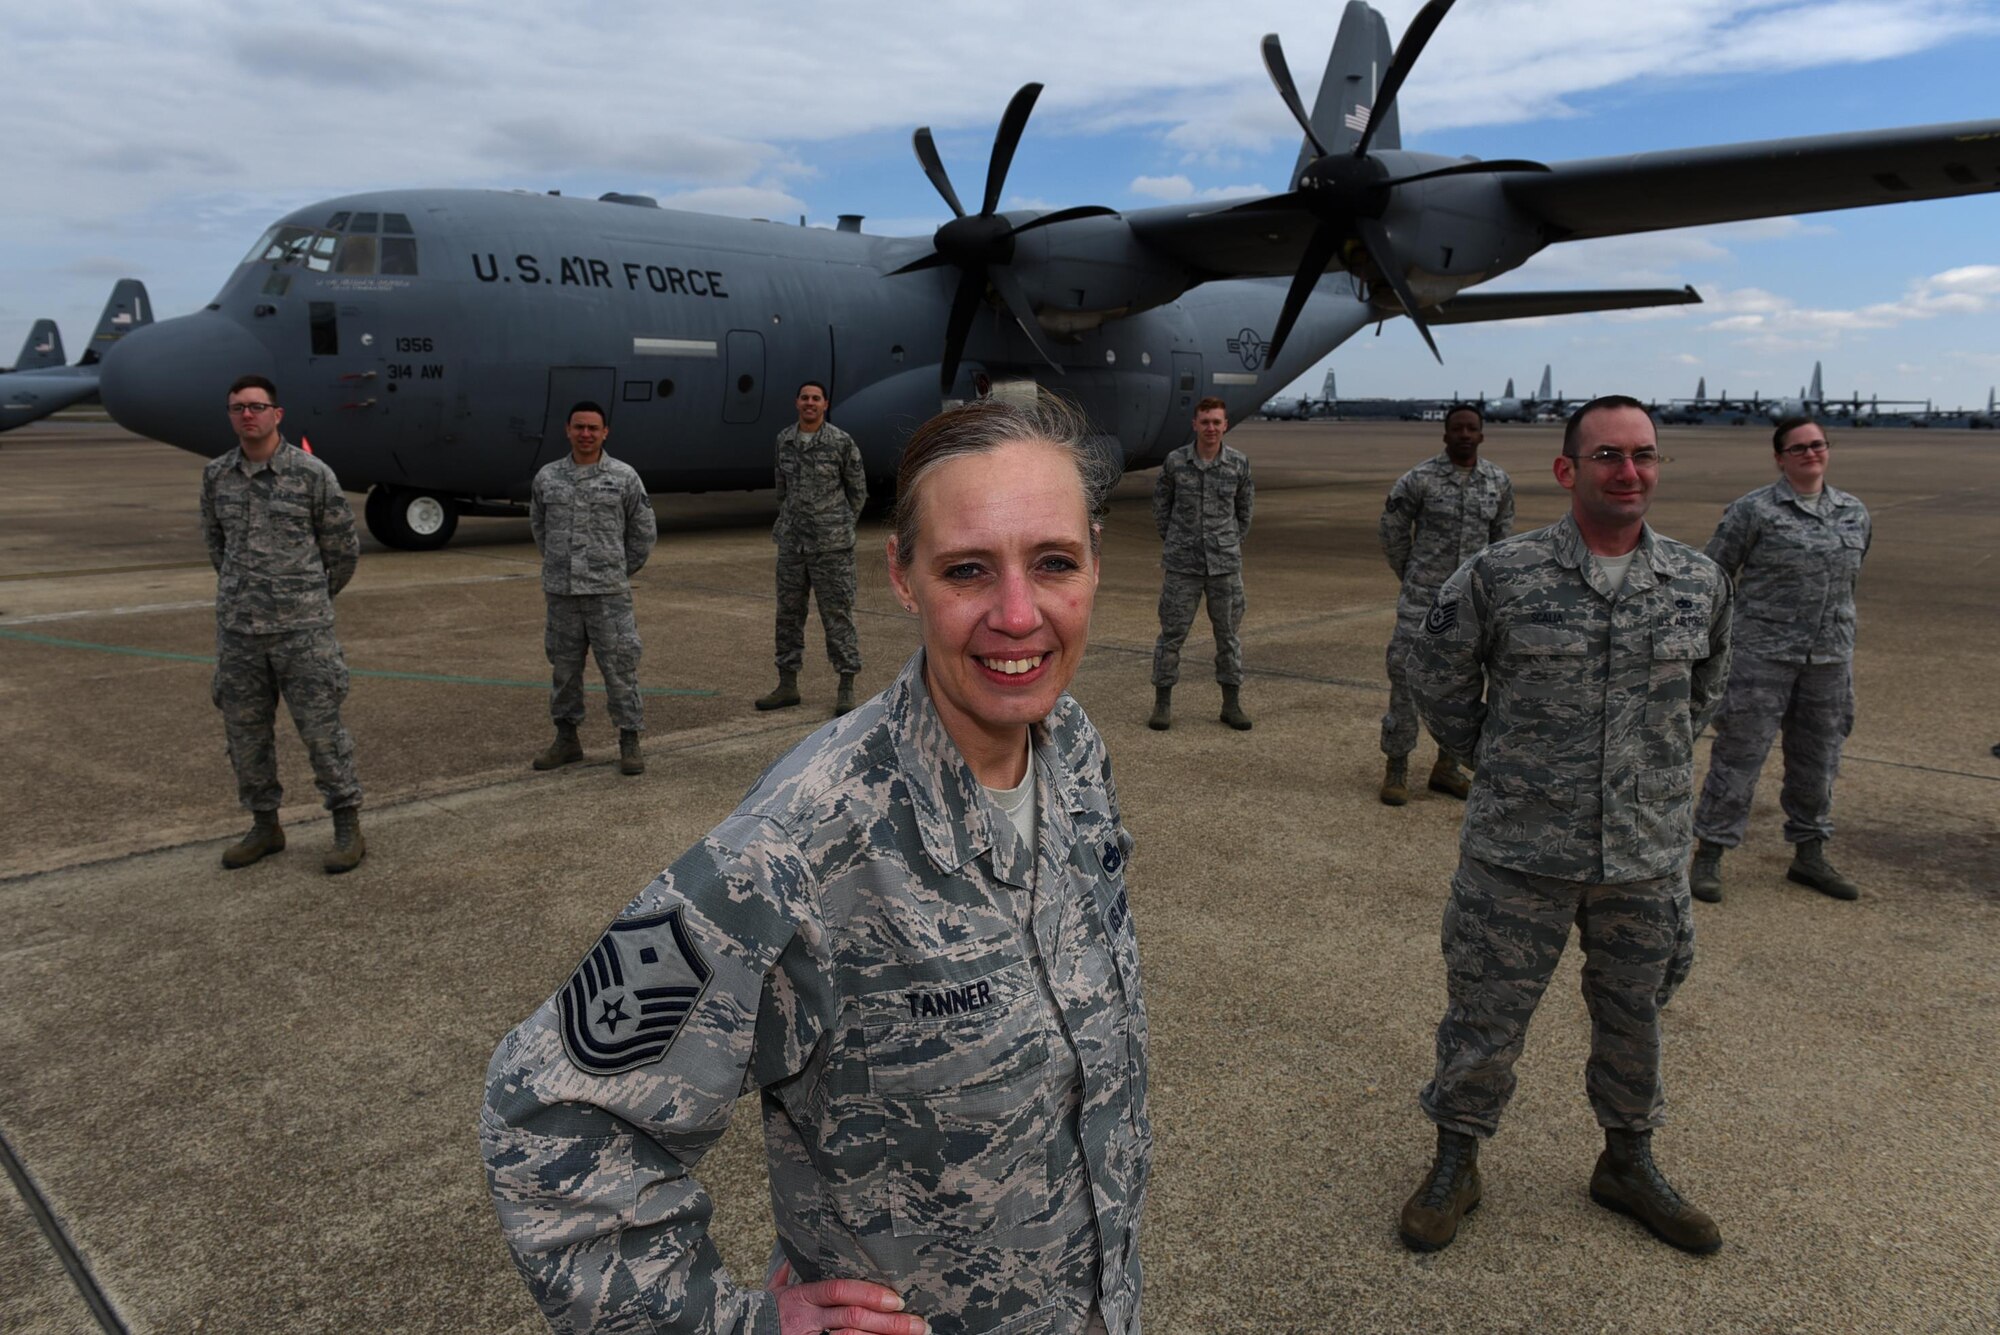 U.S. Air Force Master Sgt. Jill Tanner, 314th Aircraft Maintenance Squadron first sergeant, enlisted at 19 years old and has served 20 years in the U.S. Air Force. As a first sergeant, Tanner is the primary liaison between the commander and all matters concerning the enlisted corps of her unit. (U.S. Air Force photo by Airman 1st Class Kevin Sommer Giron)